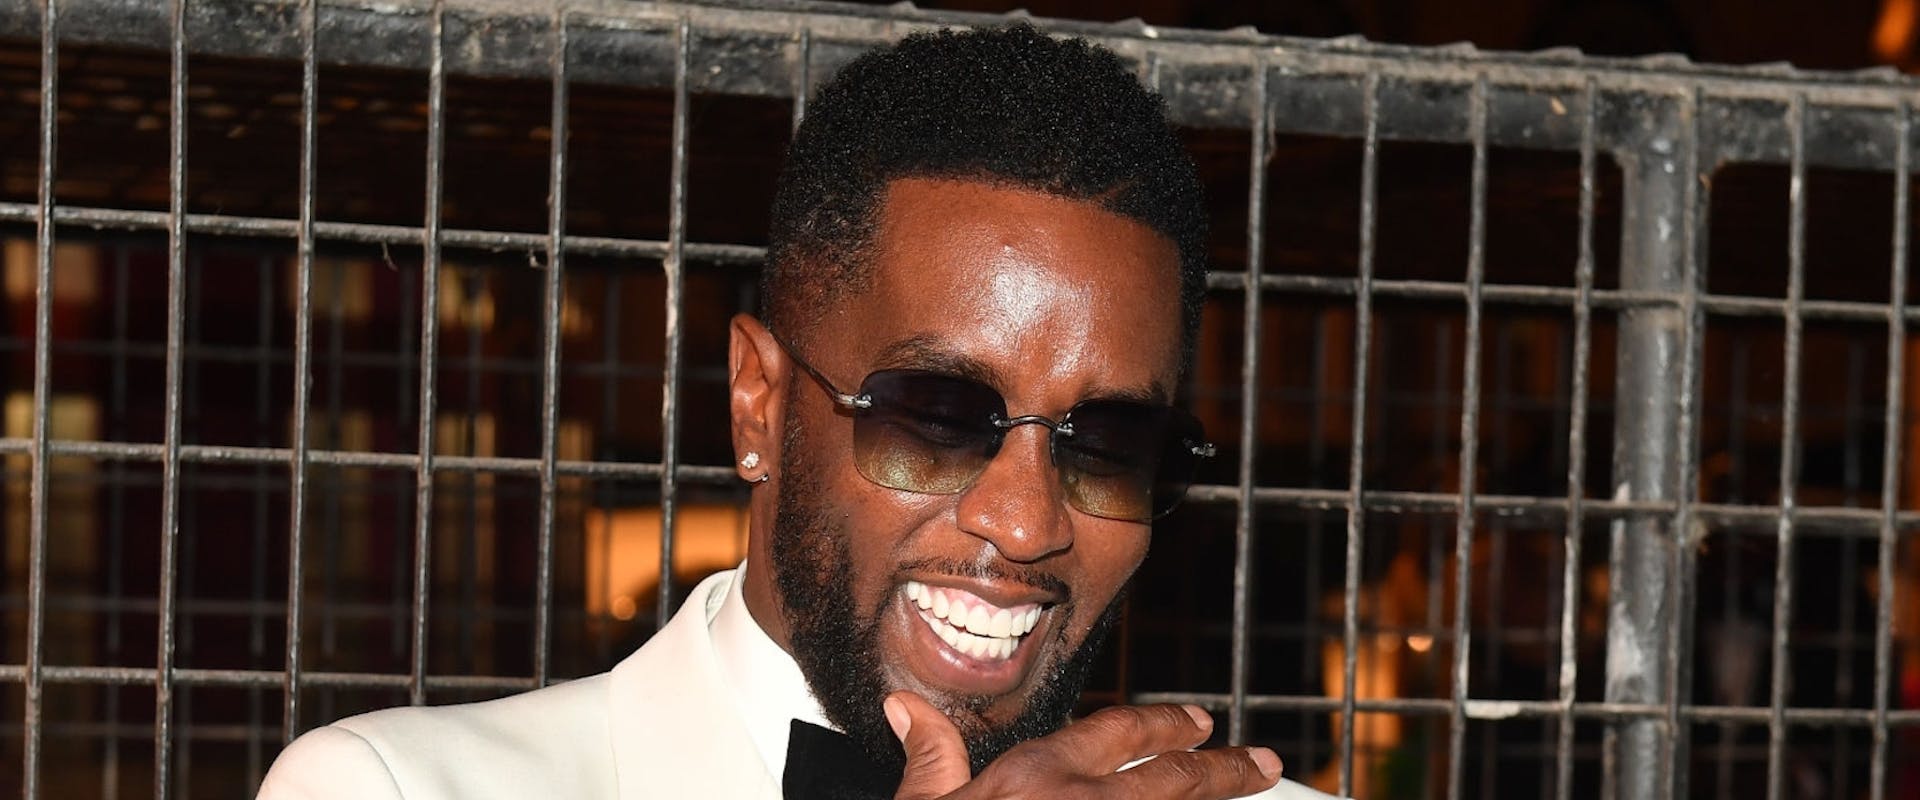 Sean "Diddy" Combs attends Black Tie Affair For Quality Control's CEO Pierre "Pee" Thomas at Fox Theater on June 02, 2021 in Atlanta, Georgia.